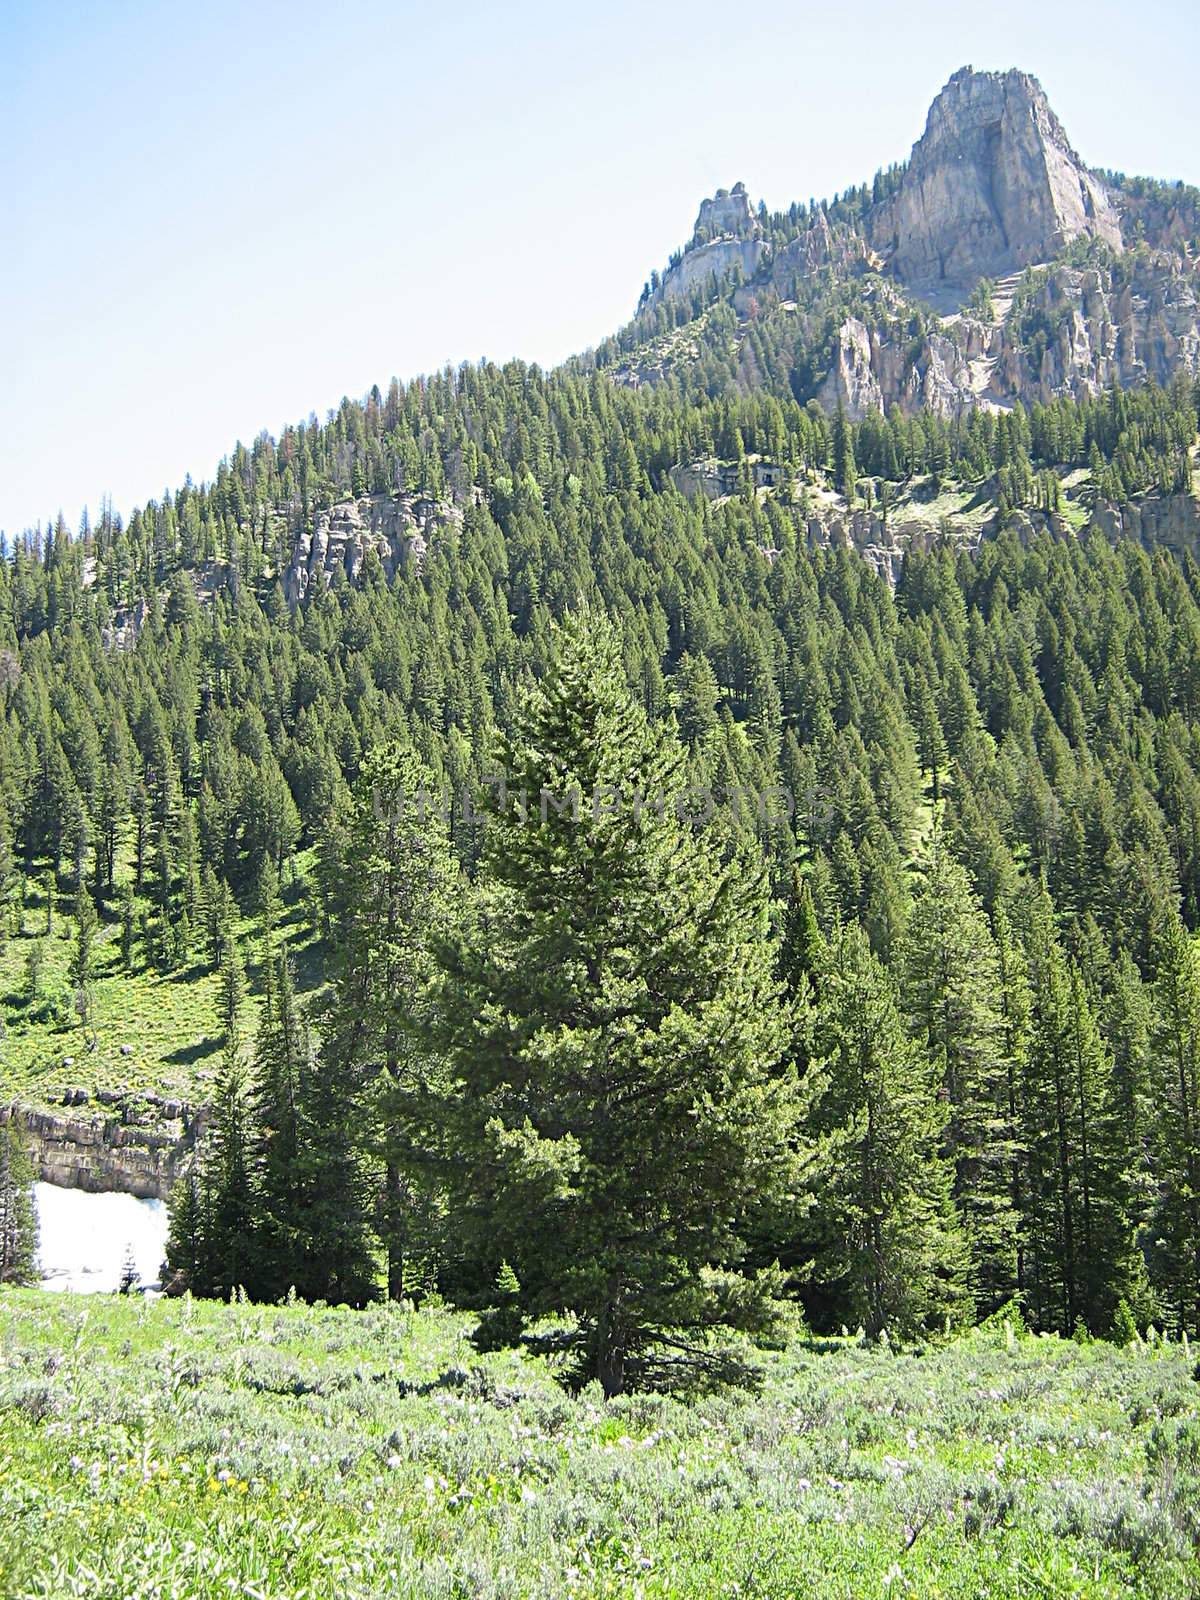 A photograph of mountain scenery in the United States.